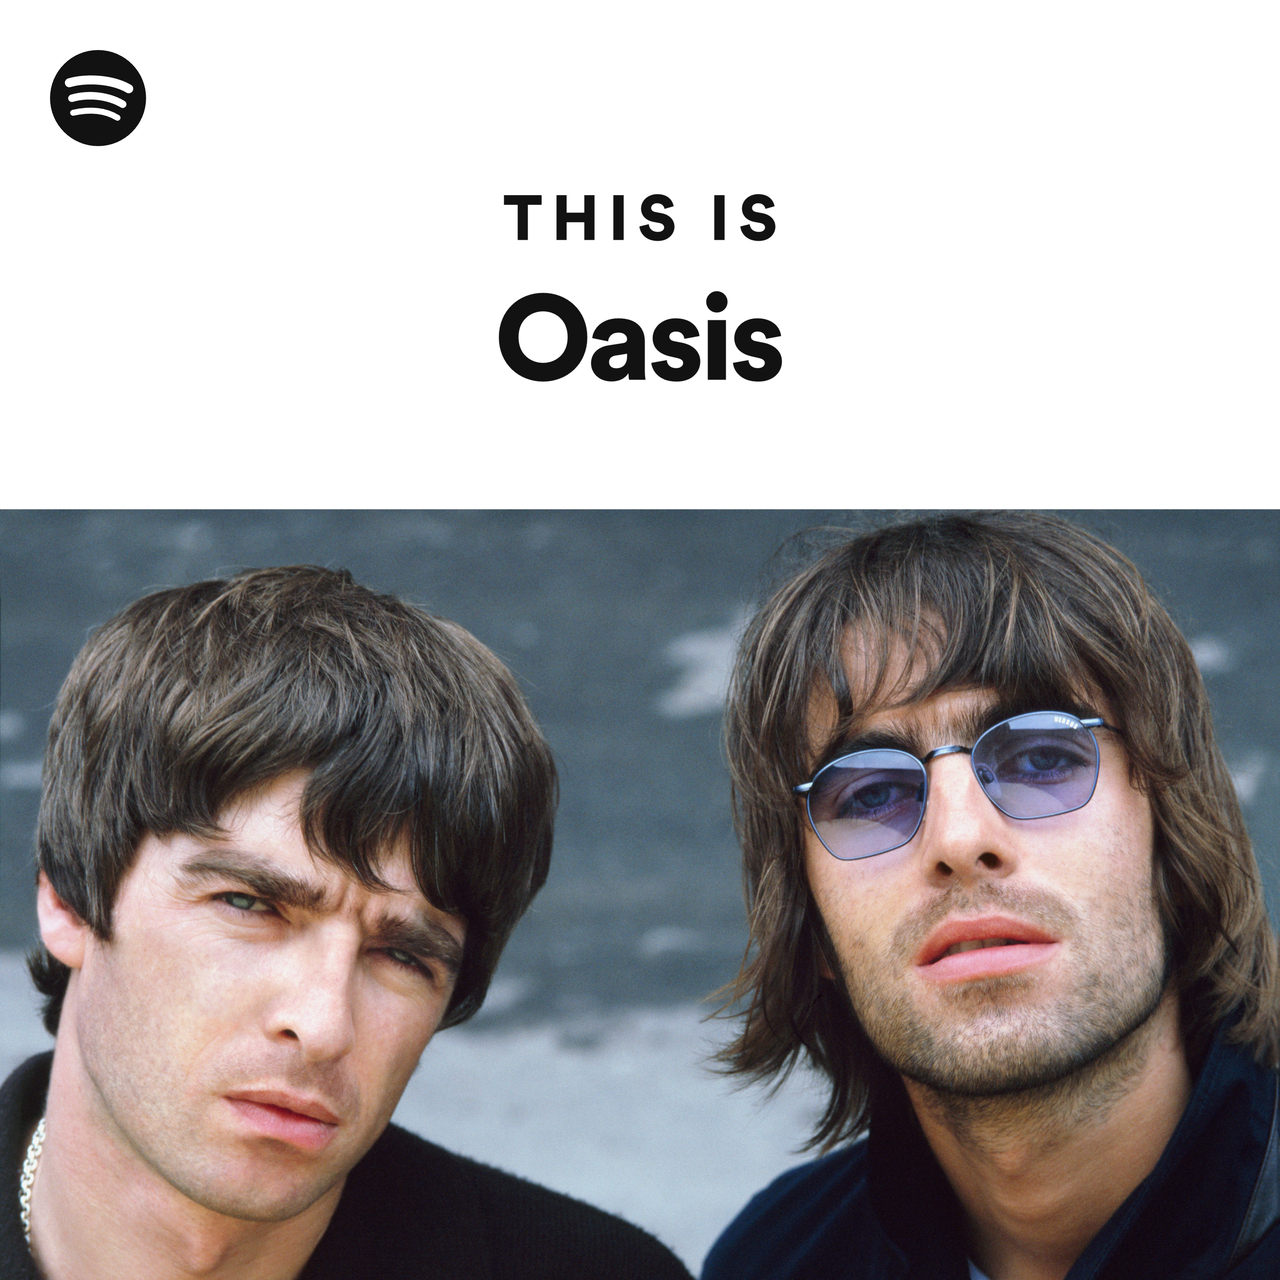 This Is Oasis